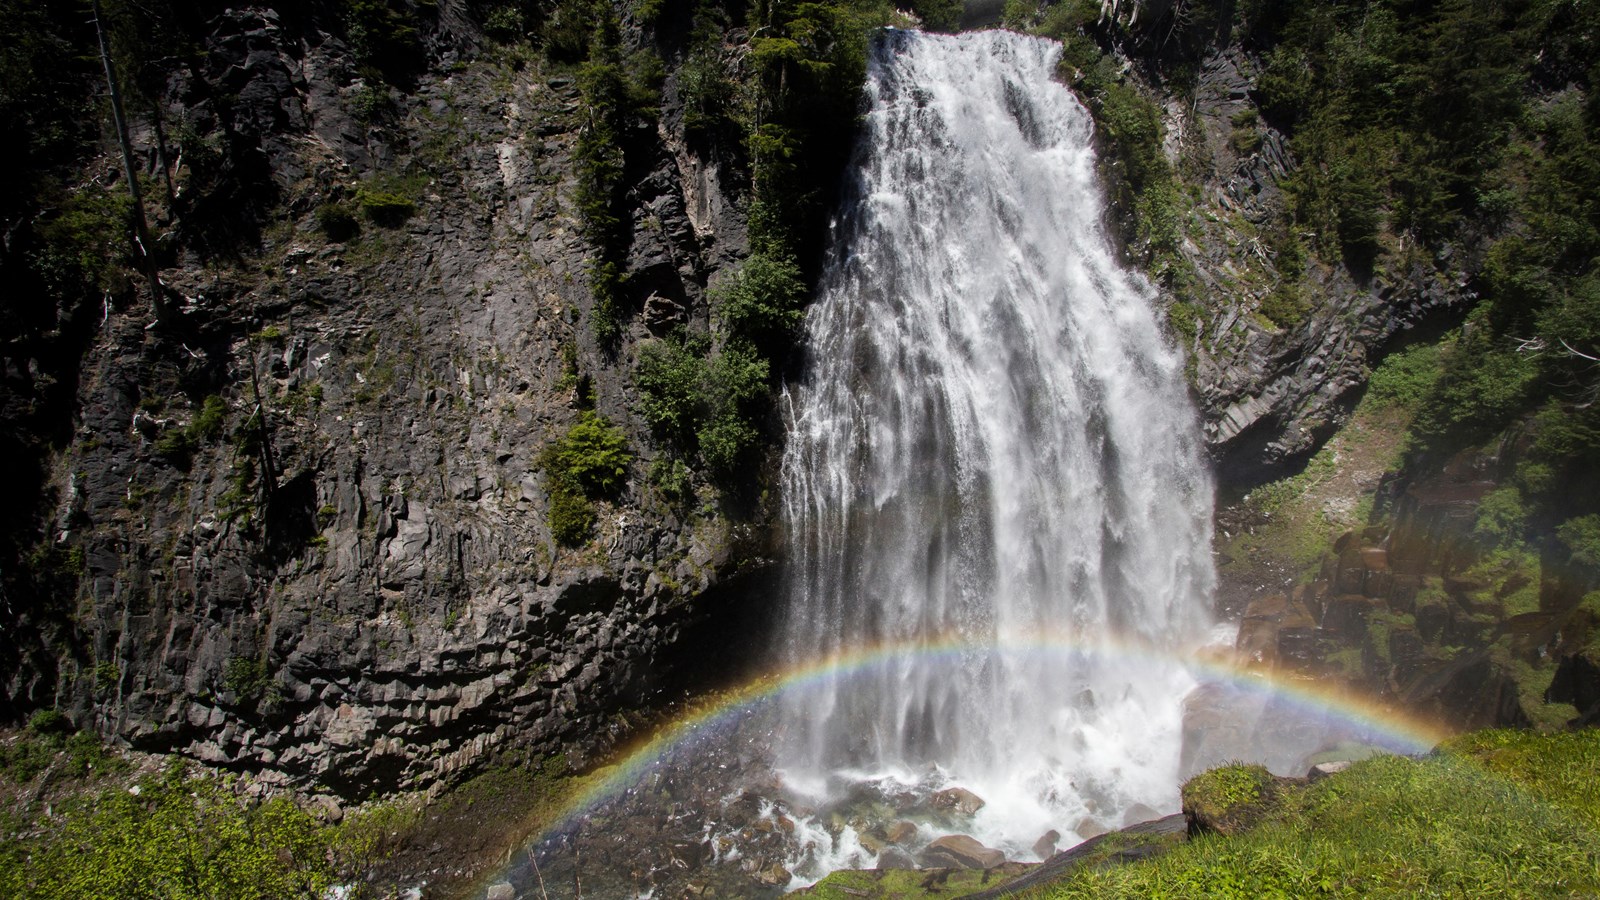 A tall waterfall gracefully plunges over a rocky cliff while a rainbow arches at its base.